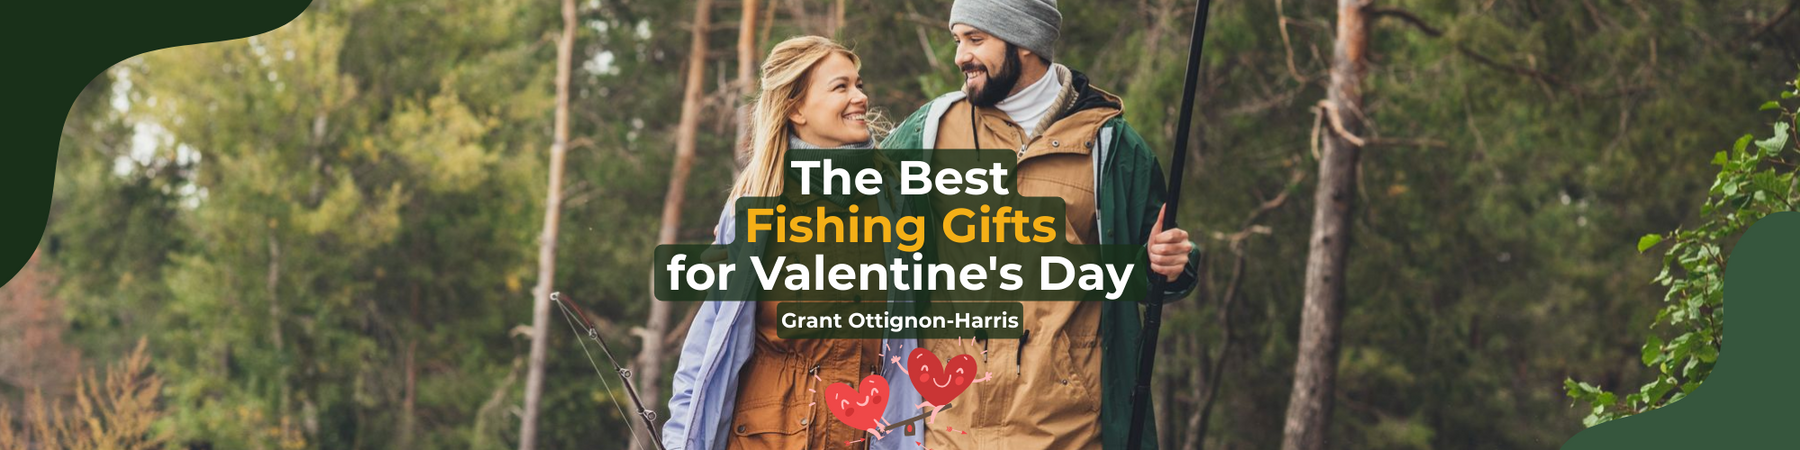 Fishing for a Heartfelt Valentine's Day Gift?